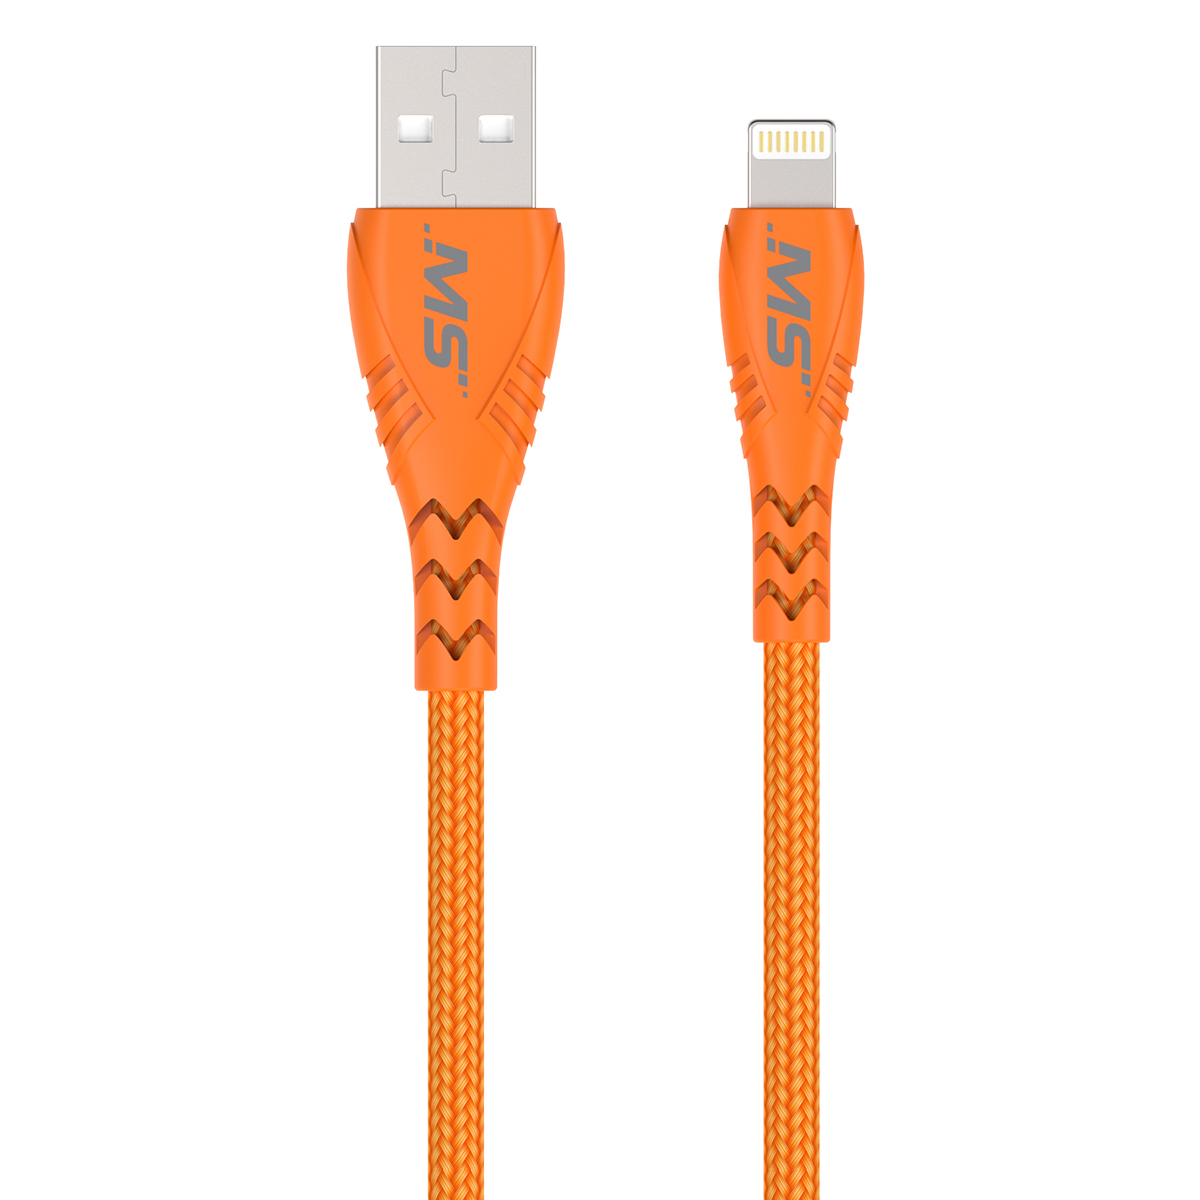 Ms 10 Hi Vis Lightning To A Cable Or